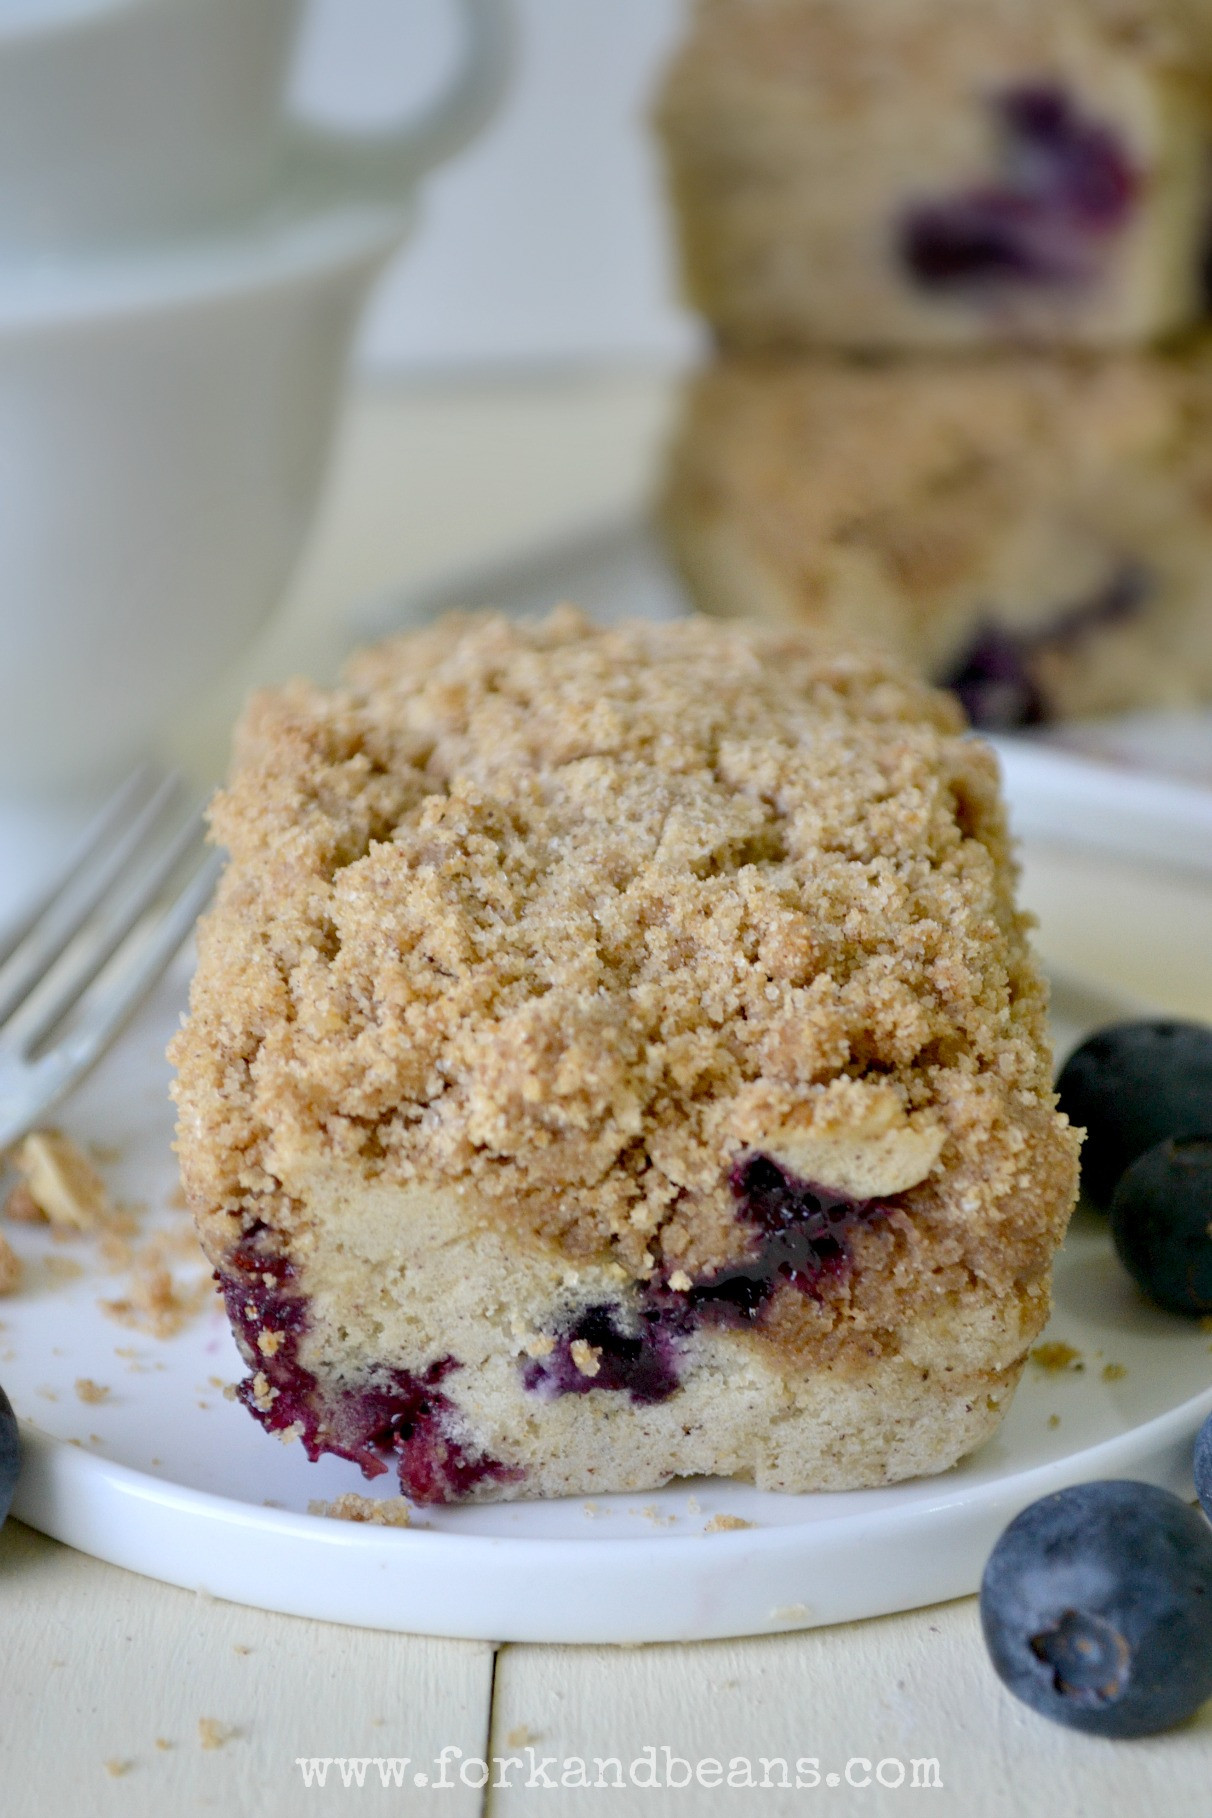 Dairy Free Coffee Cake
 Gluten Free Vegan Blueberry Coffee Cake Fork and Beans